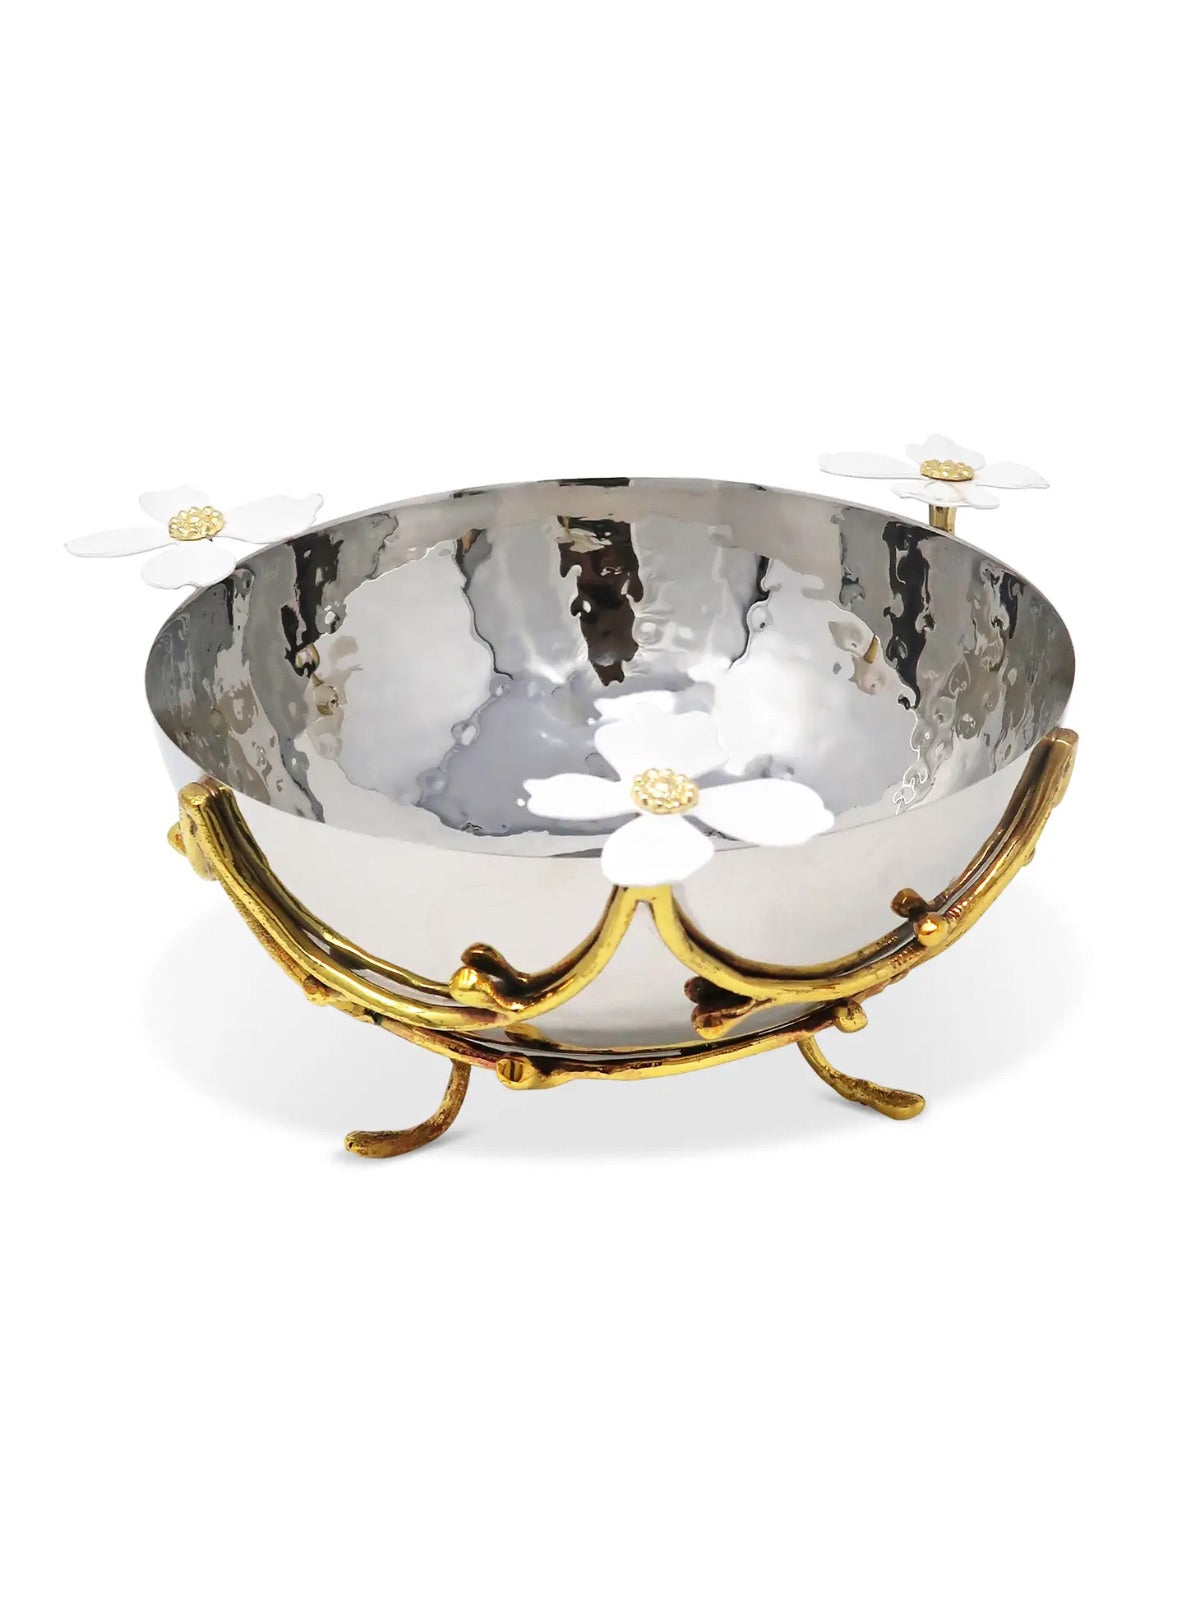 Stainless Steel Bowl with Elegant Jewel Flower Design - Dimension, 7D x 5H inches.